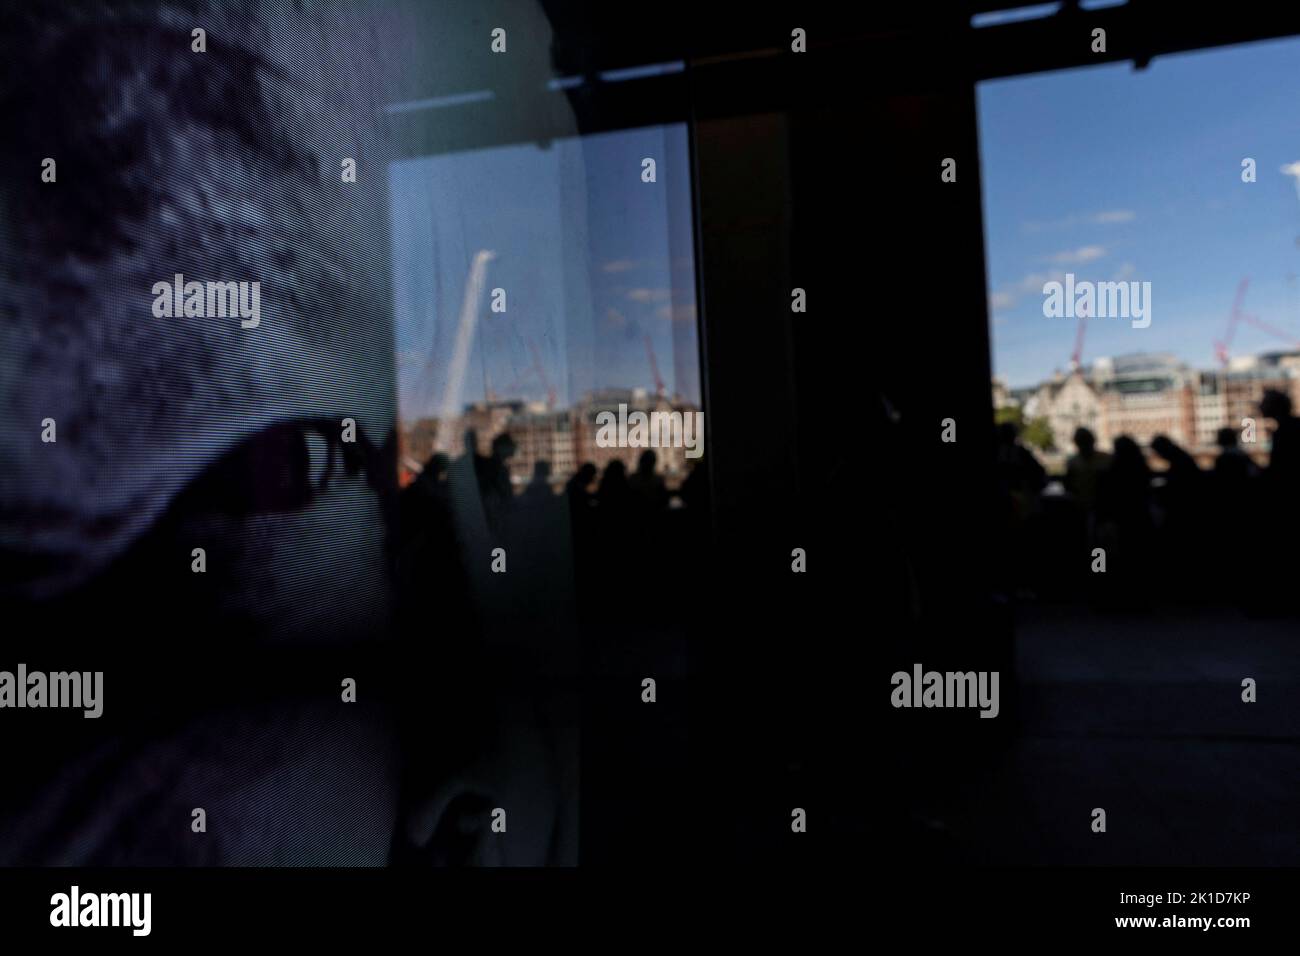 The eyes of Britain's Queen Elizabeth are seen projected on a screen as people stand in a queue to pay respect to Queen Elizabeth, following her death, in London, Britain September 17, 2022. REUTERS/Carlos Barria Stock Photo